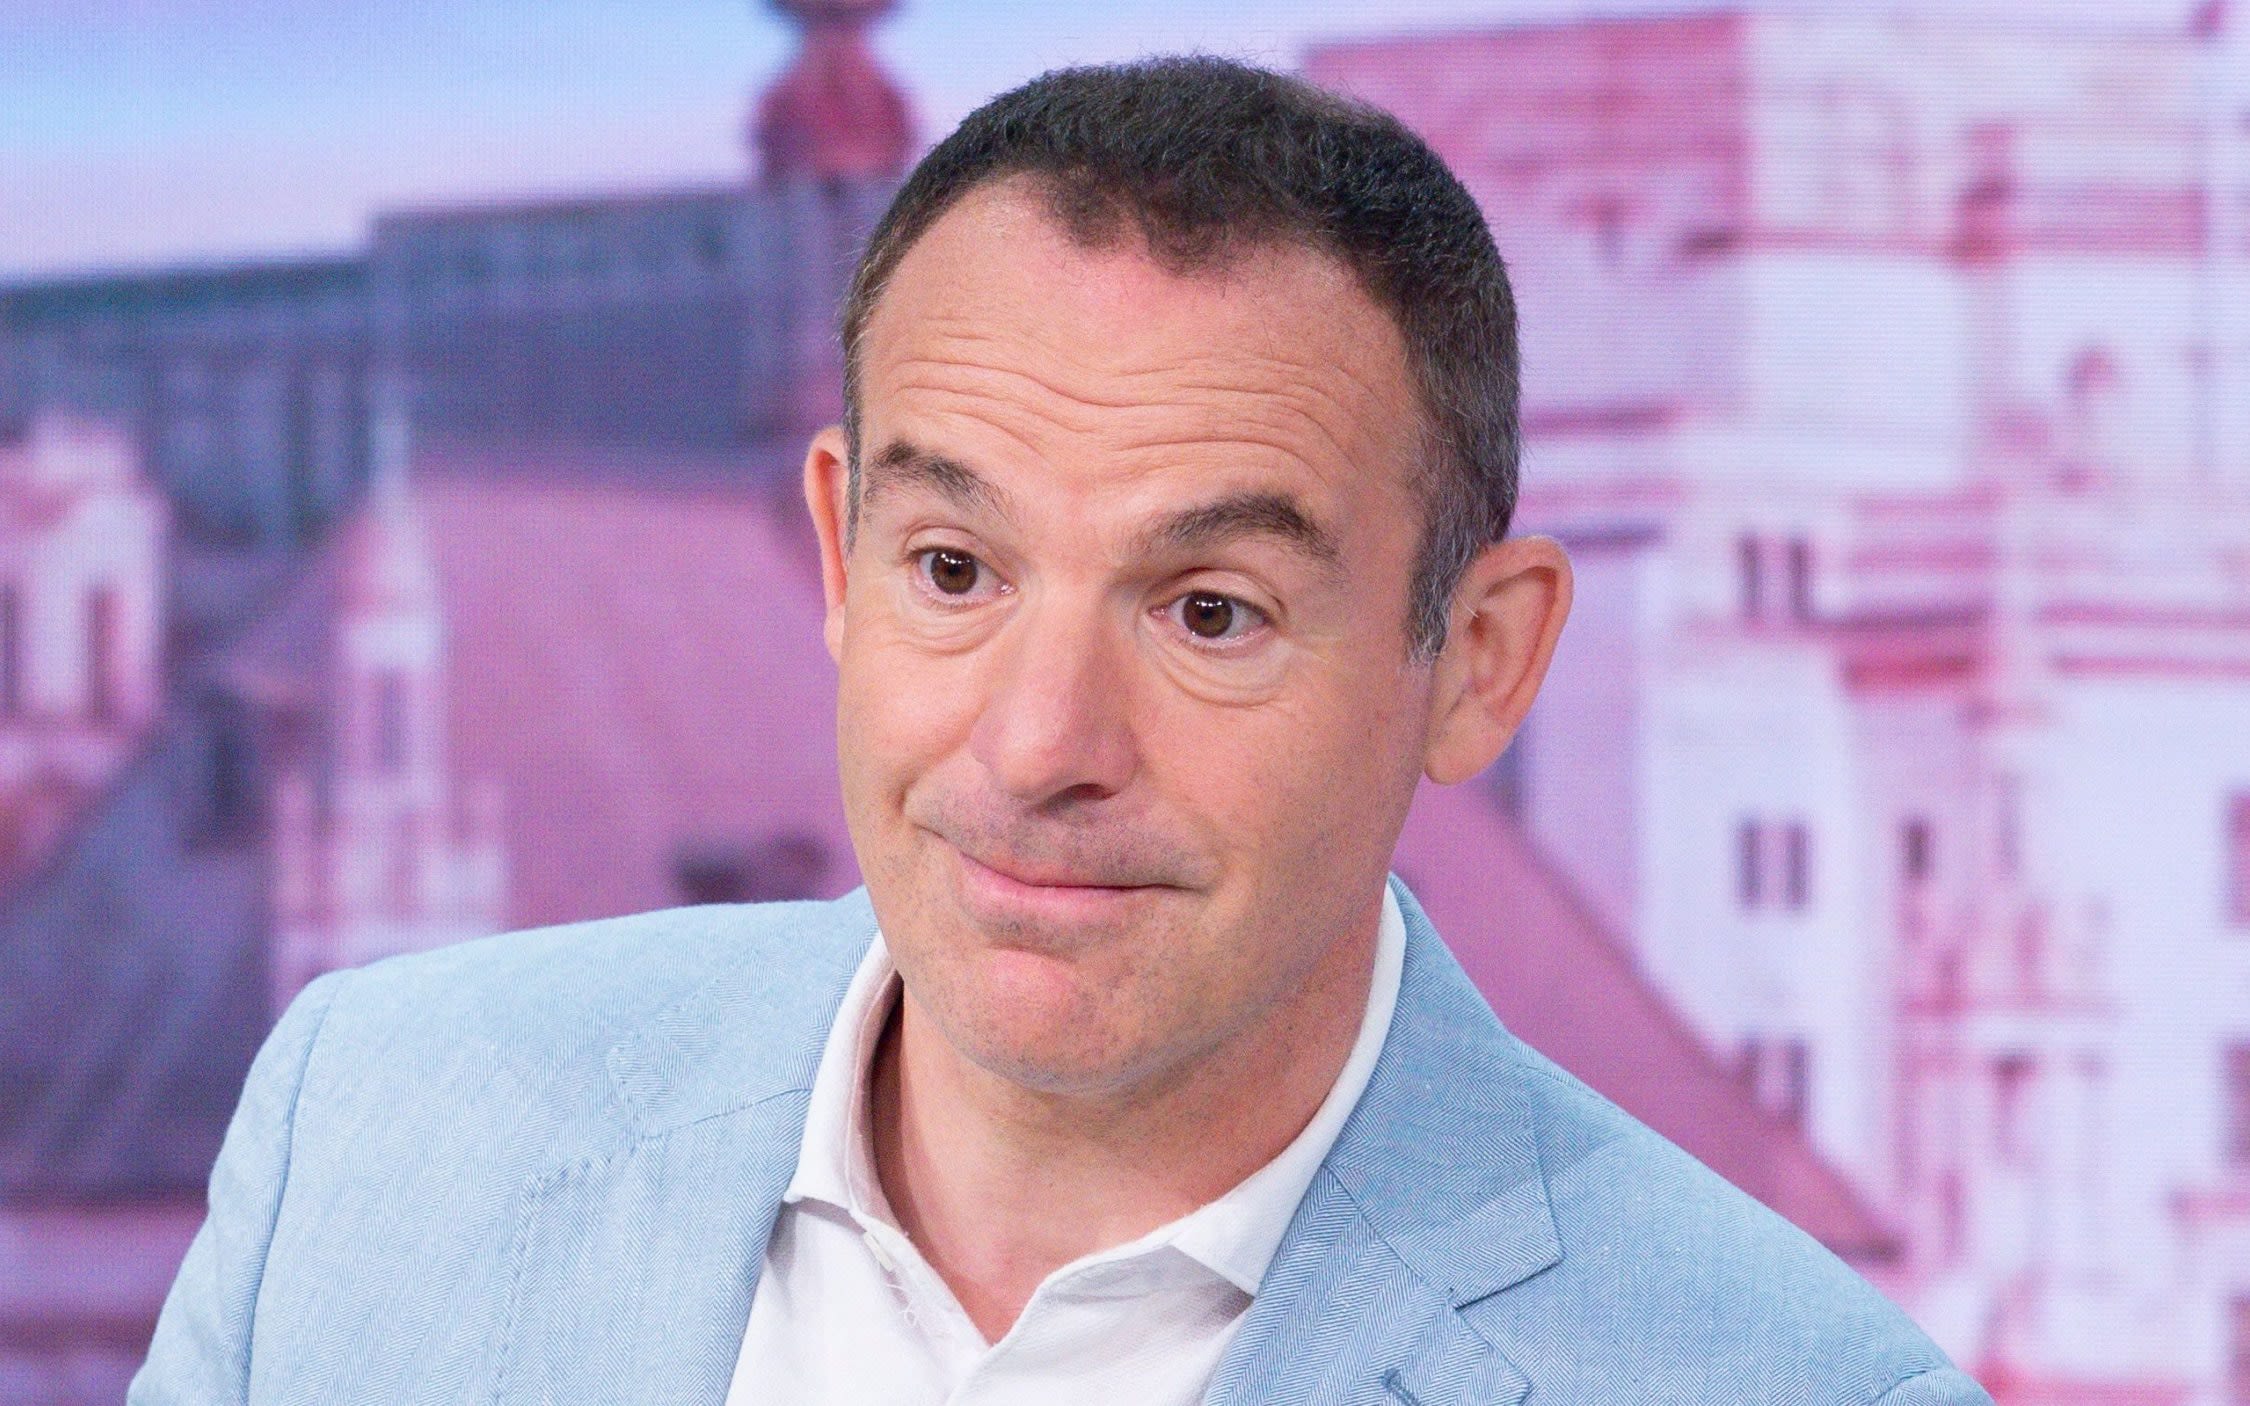 Martin Lewis hits out at Tories for ‘weaponising’ him against Labour